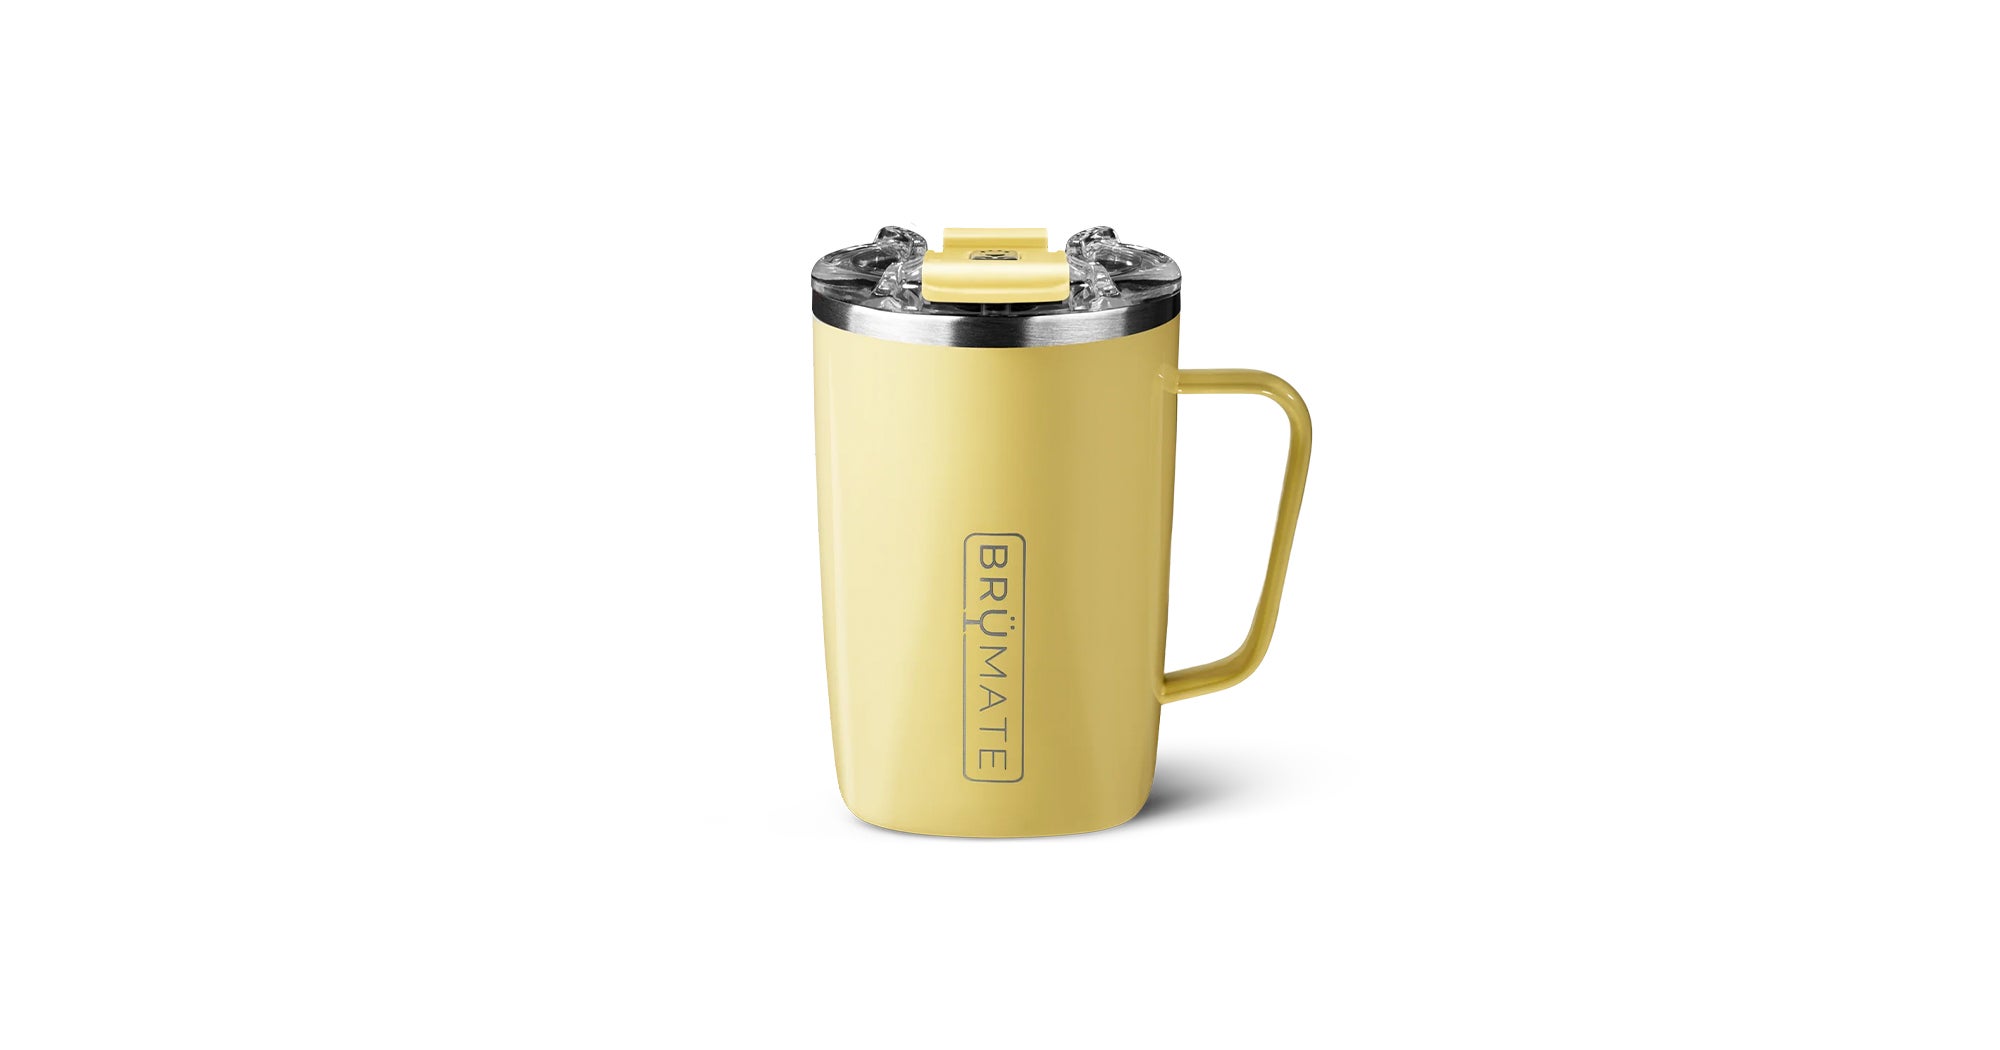 Stanley Insulated Thermos 32oz - Beyond Running